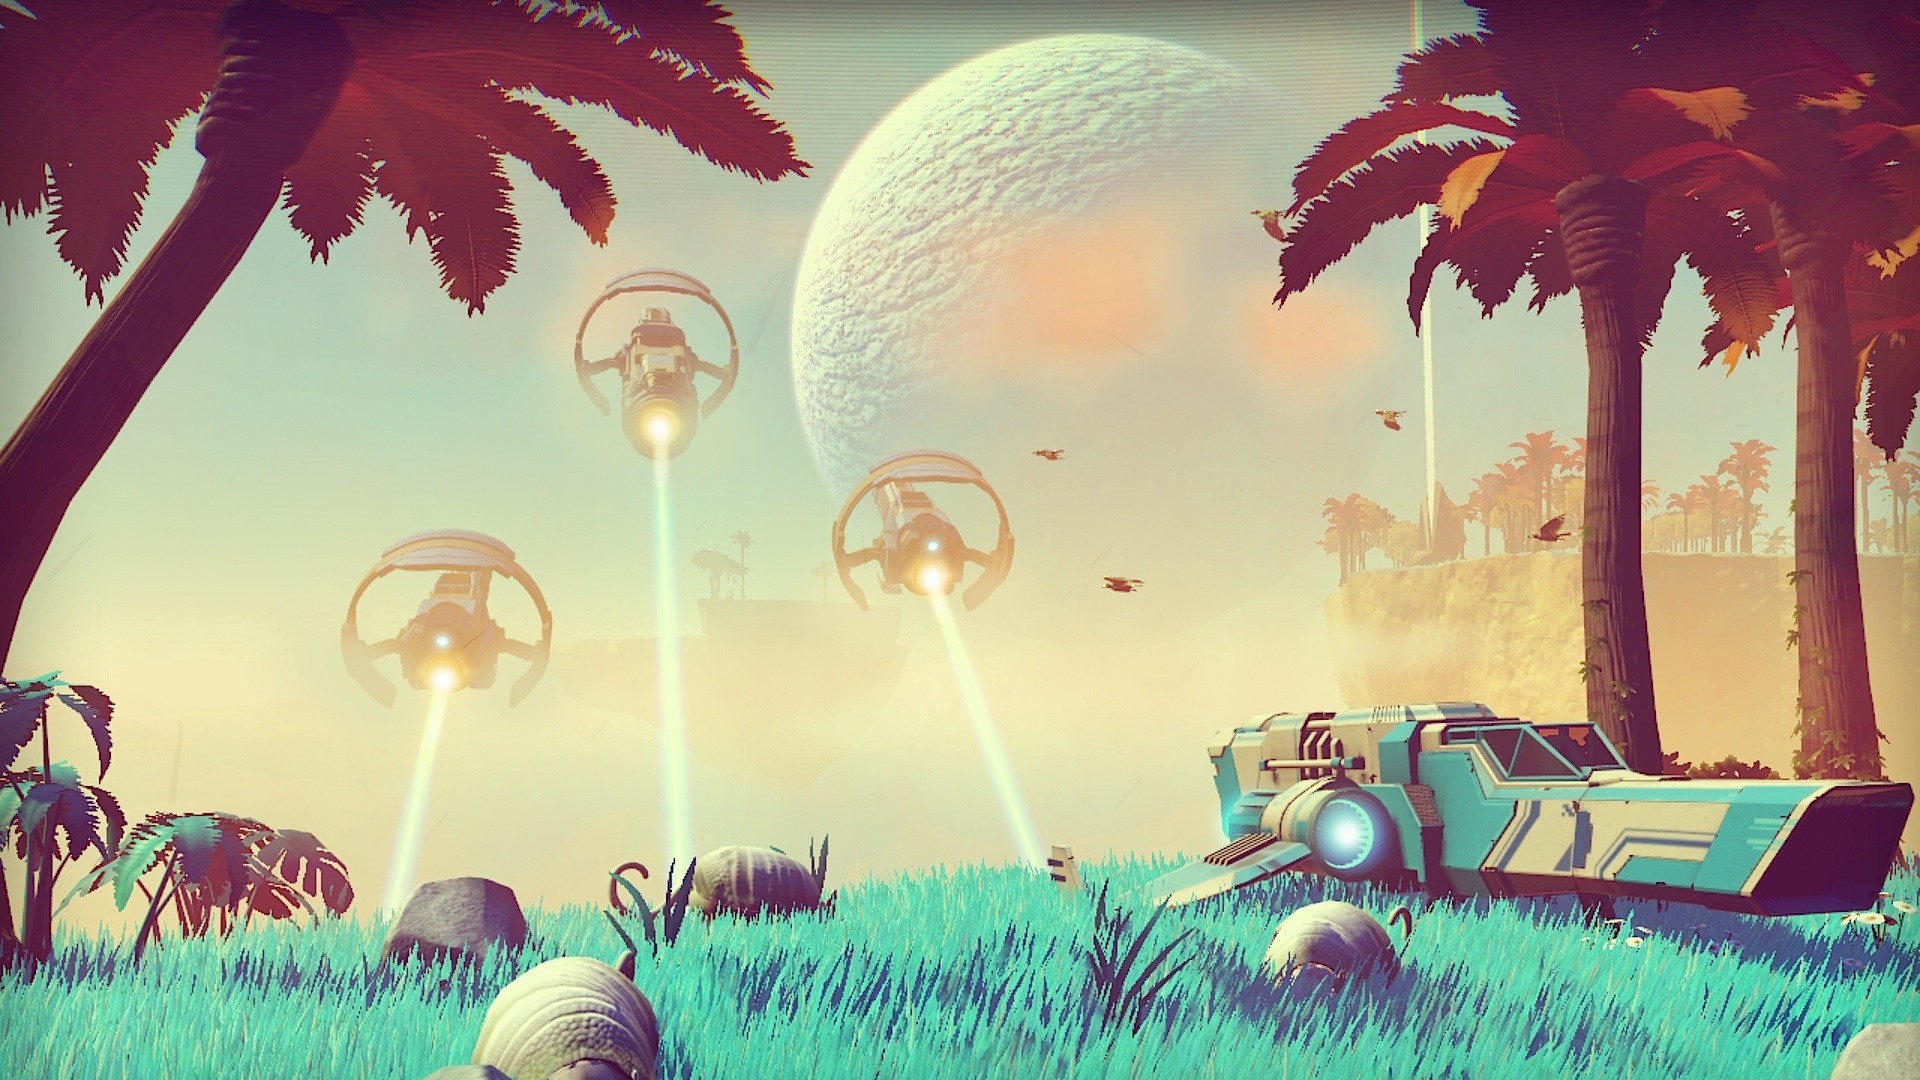 Watch The Story Behind Hello Games' No Man's Sky